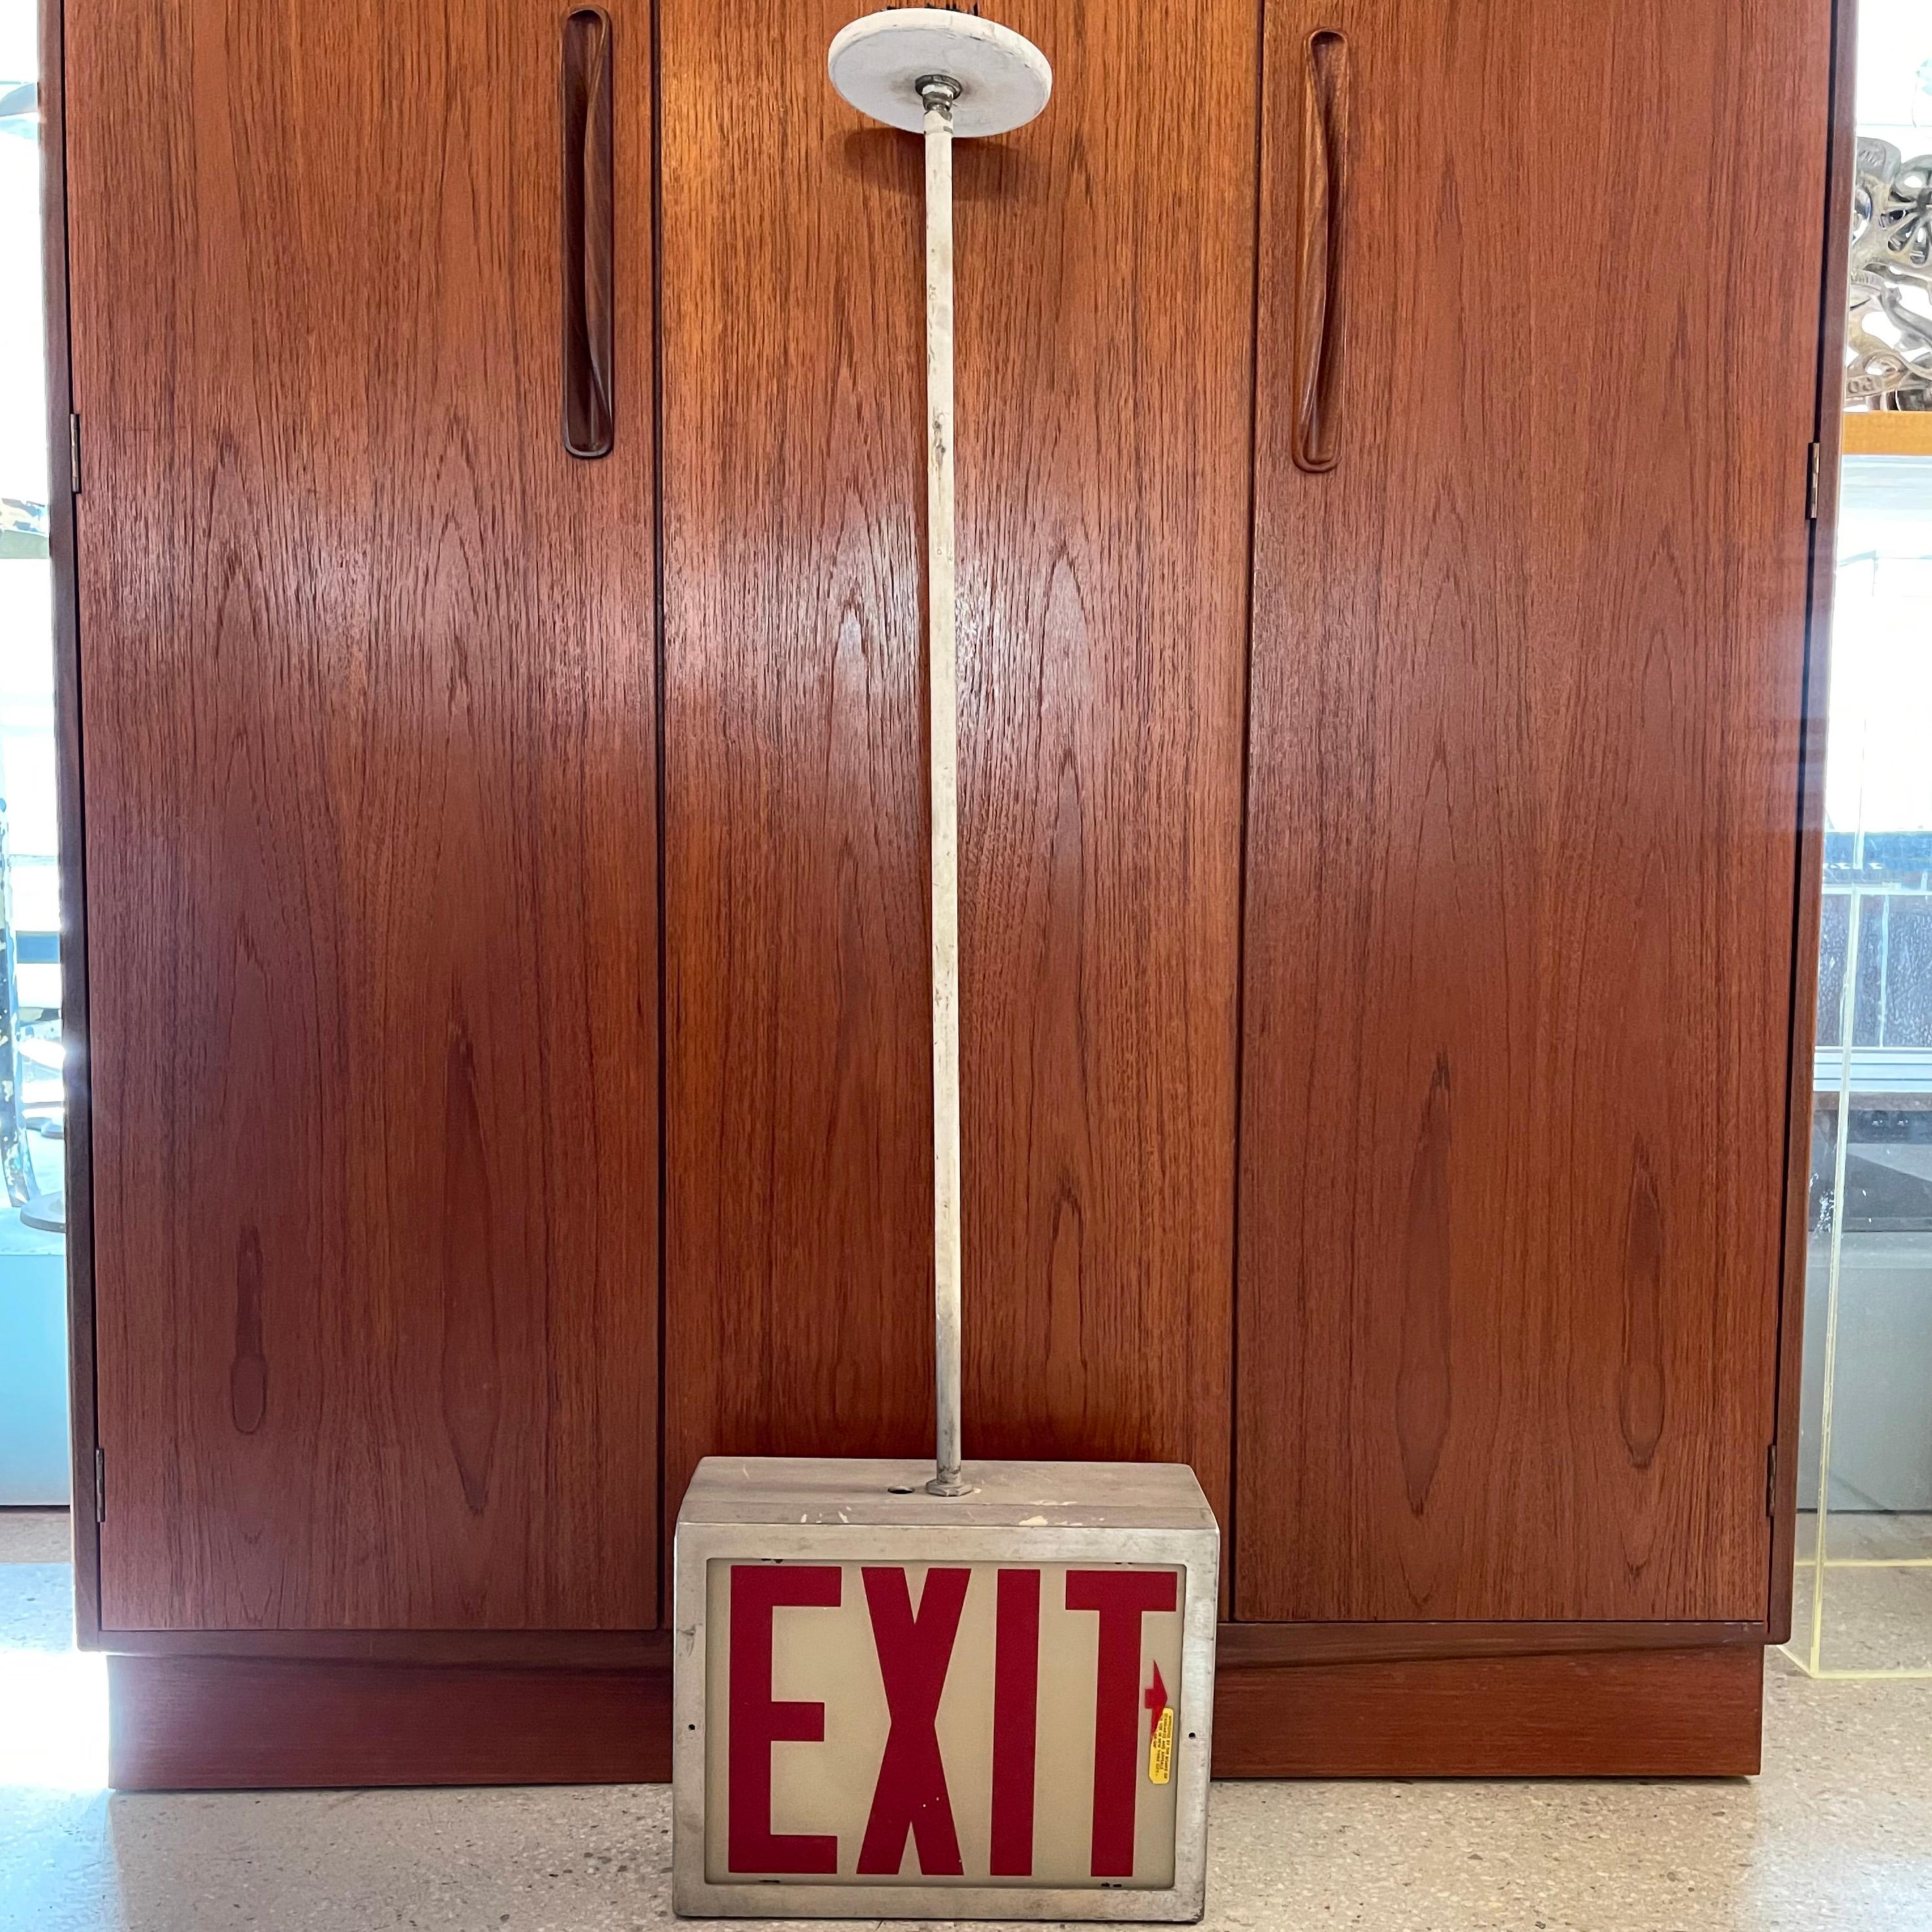 Midcentury, dobule-sided, flush-mount, exit sign light features a tapered aluminum, 10 inch height cube with glass EXIT shades on a painted steel pole with ceiling canopy.